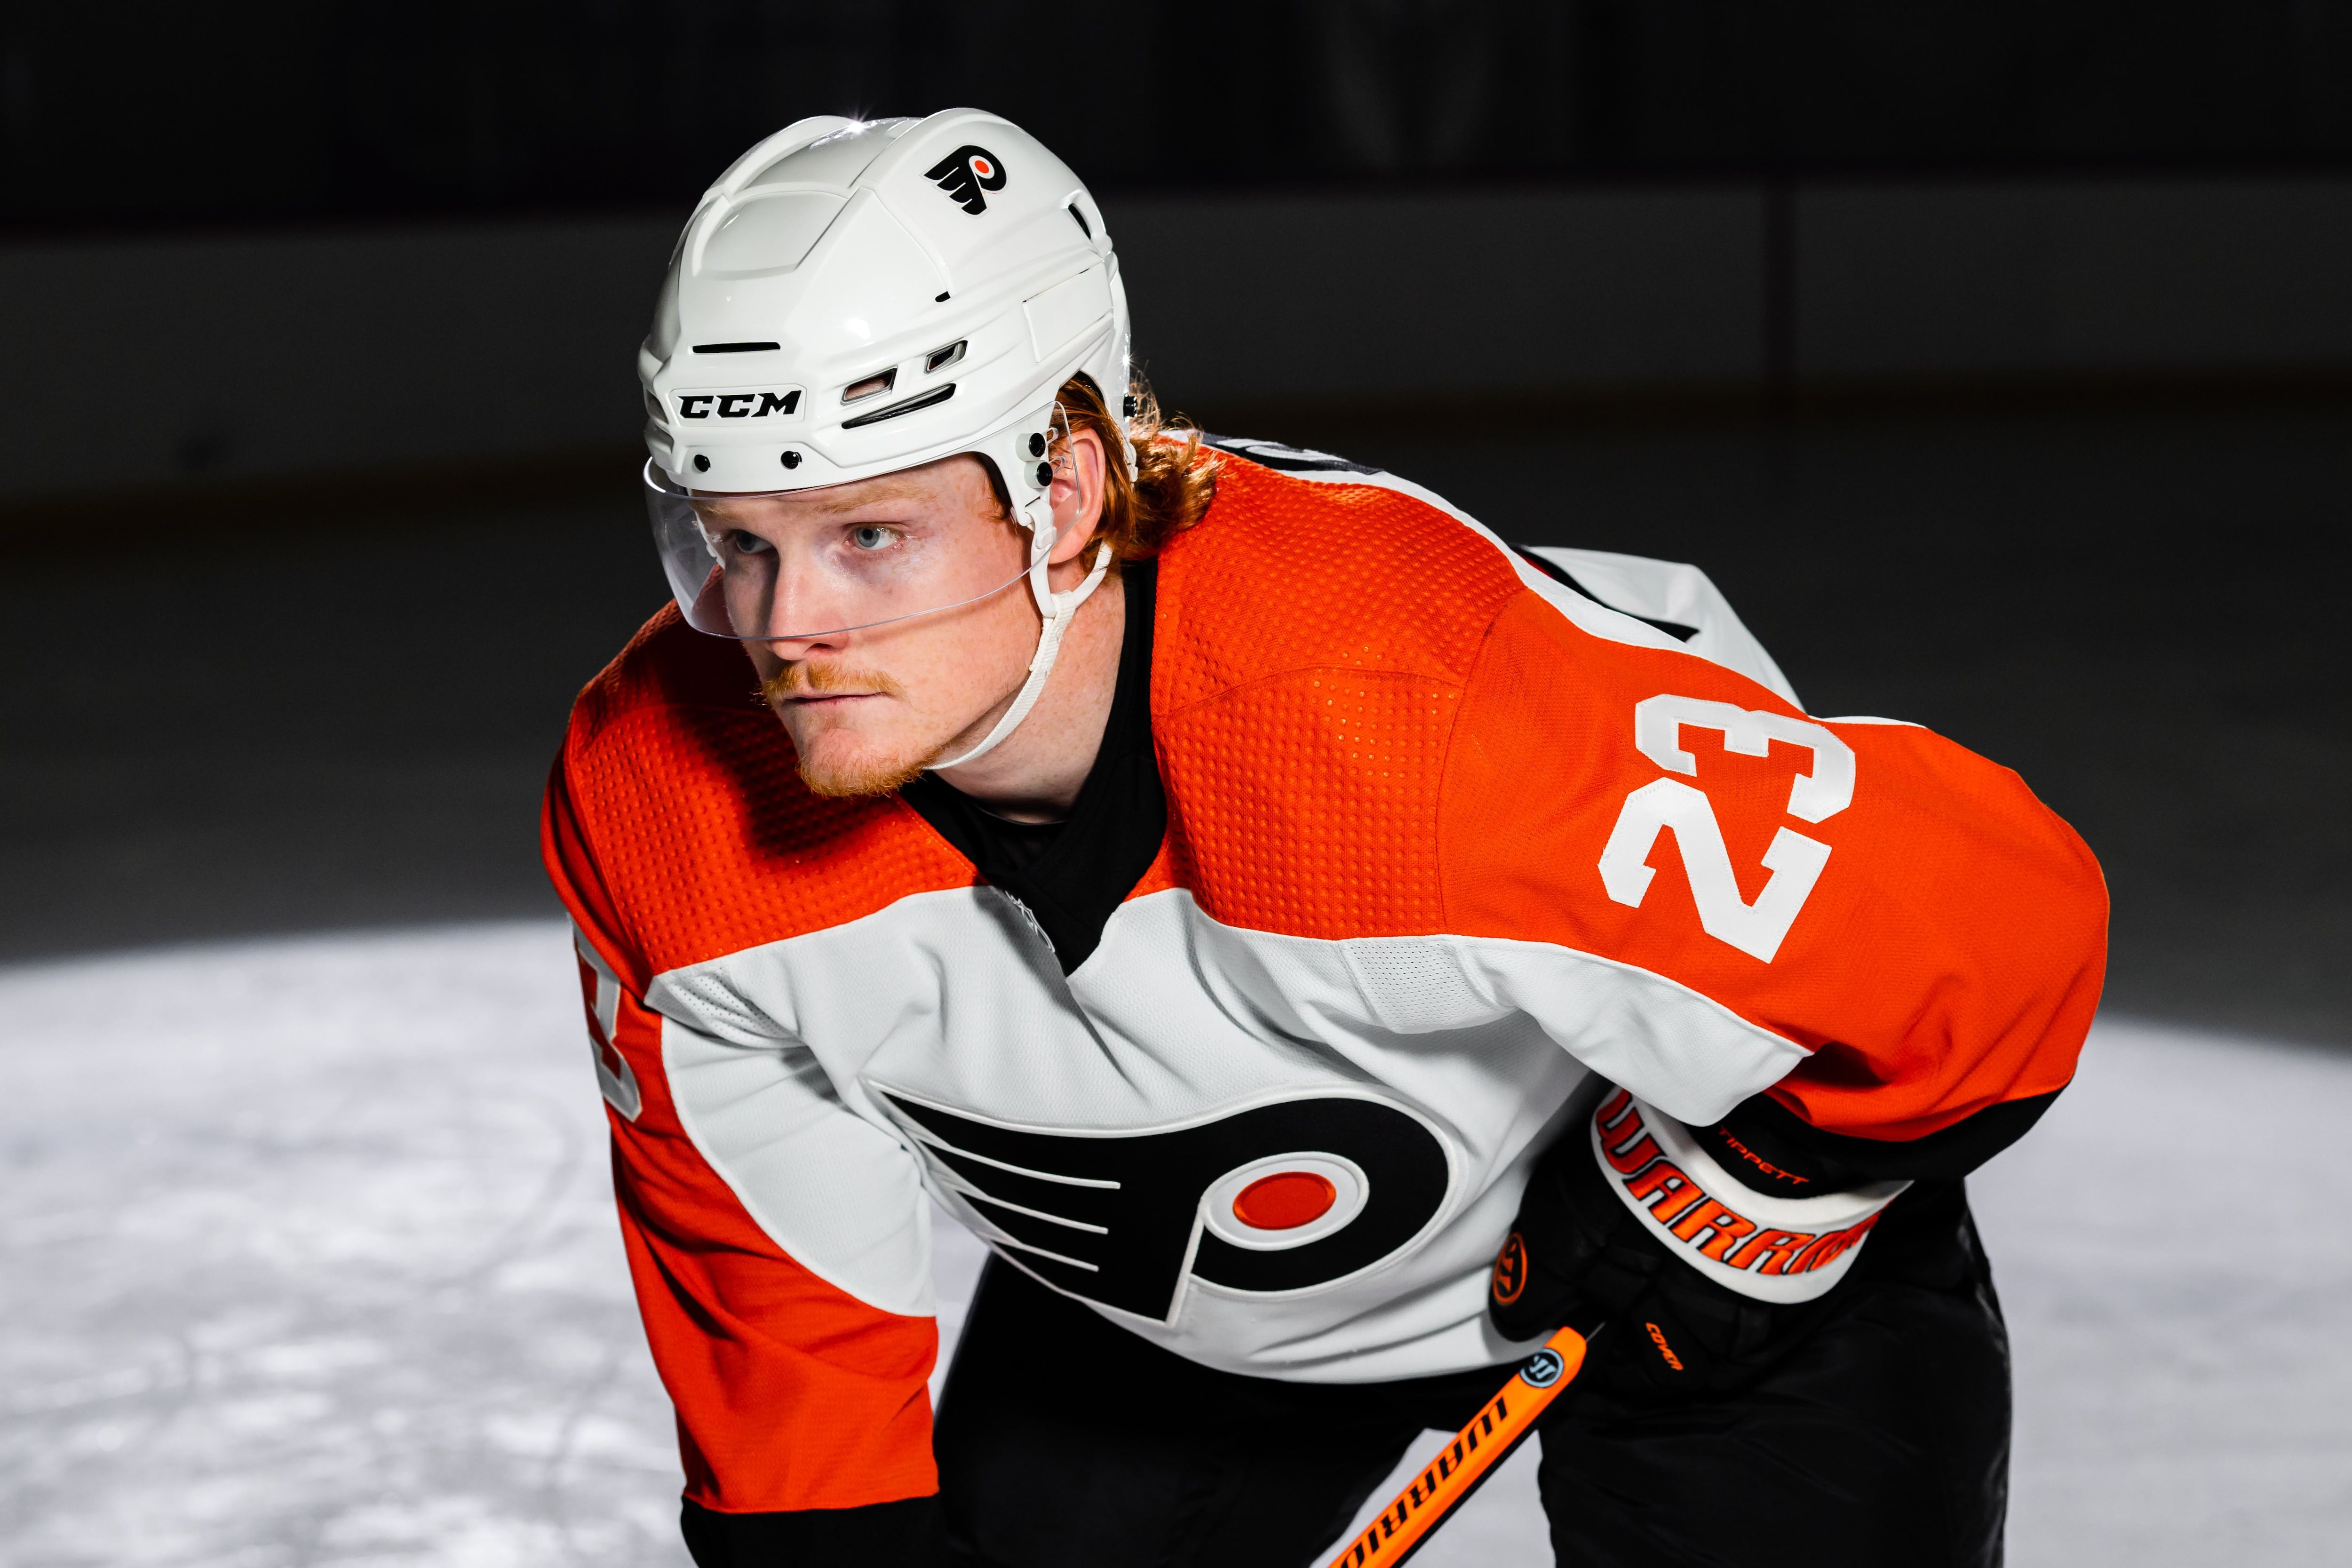 Flyers Alternate Jersey Concept I made last night. We need a nicer